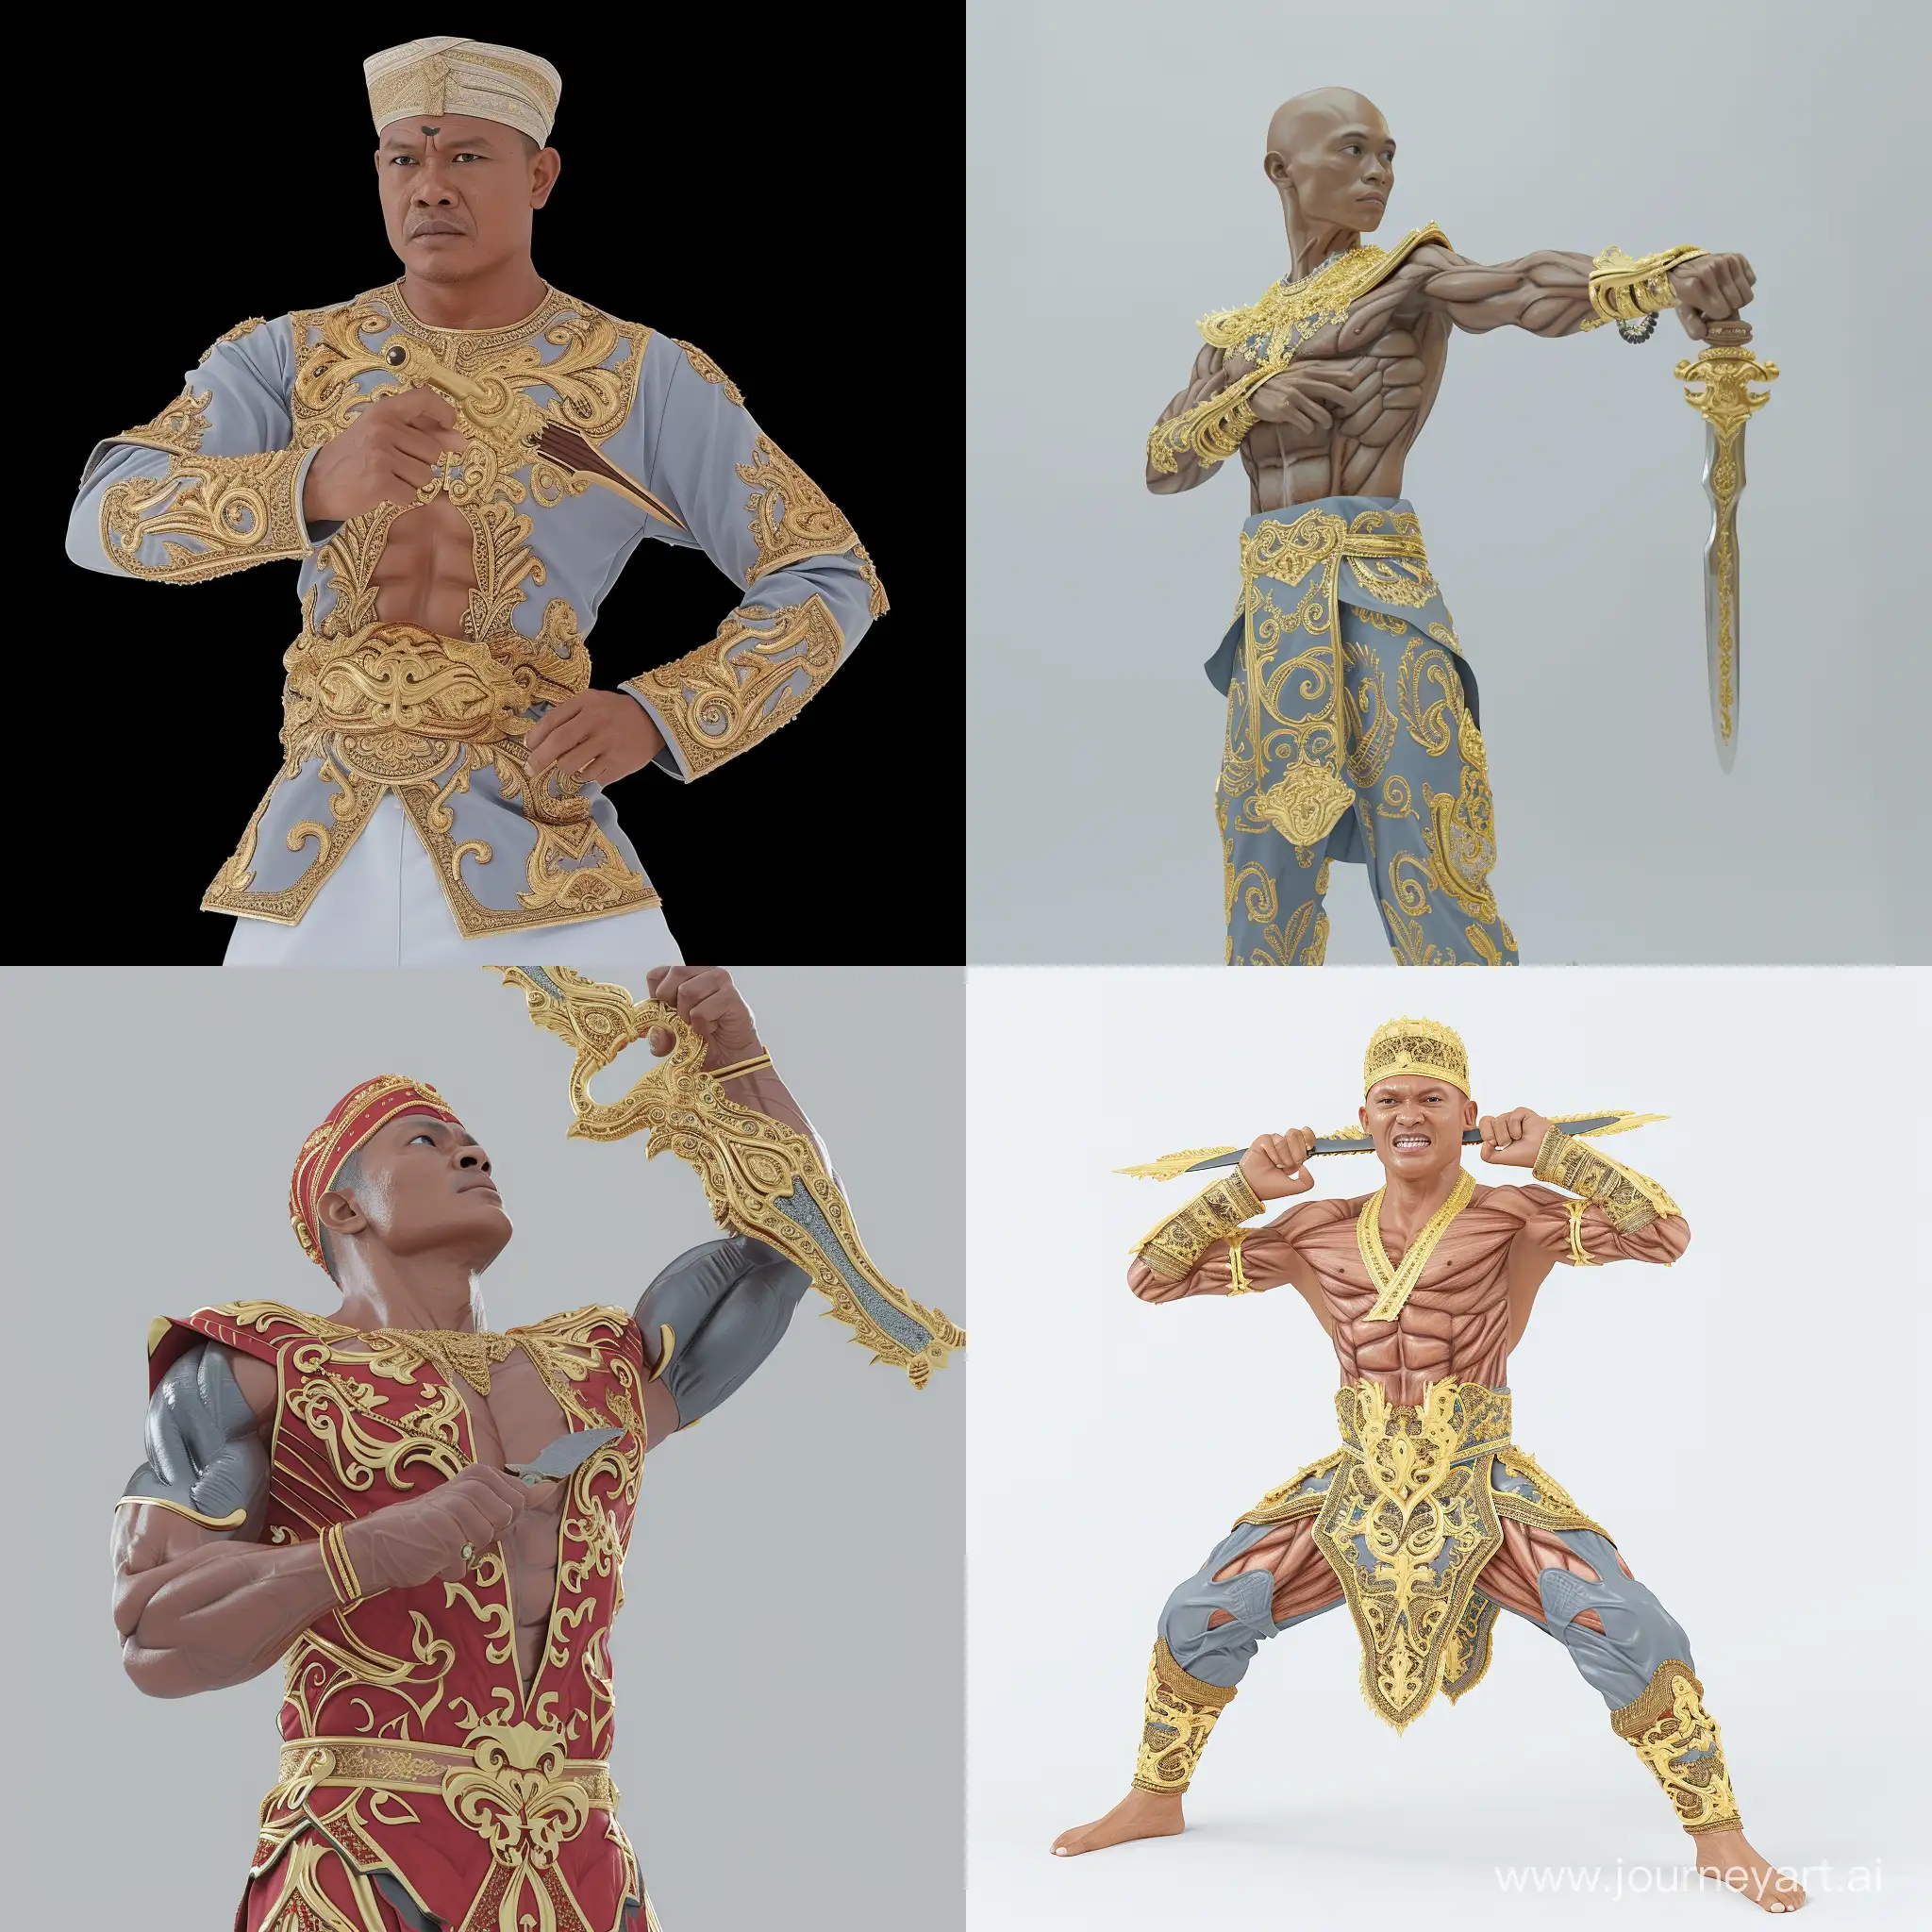 realistic muscular malay man with exaggerated muscles wear traditional malay costume holding a keris traditional waepon --sref https://pemetaanbudaya.jkkn.gov.my/assets/images/upload/culture_20230321093737.jpg https://jspewter.com.my/wp-content/themes/twentyeleven/cms/uploads/photos/5528.VIP6_142GBB_12x15_2_Keris_GoldPlatedPewter_PremiumSouvenirGiftsMalaysia.jpg 